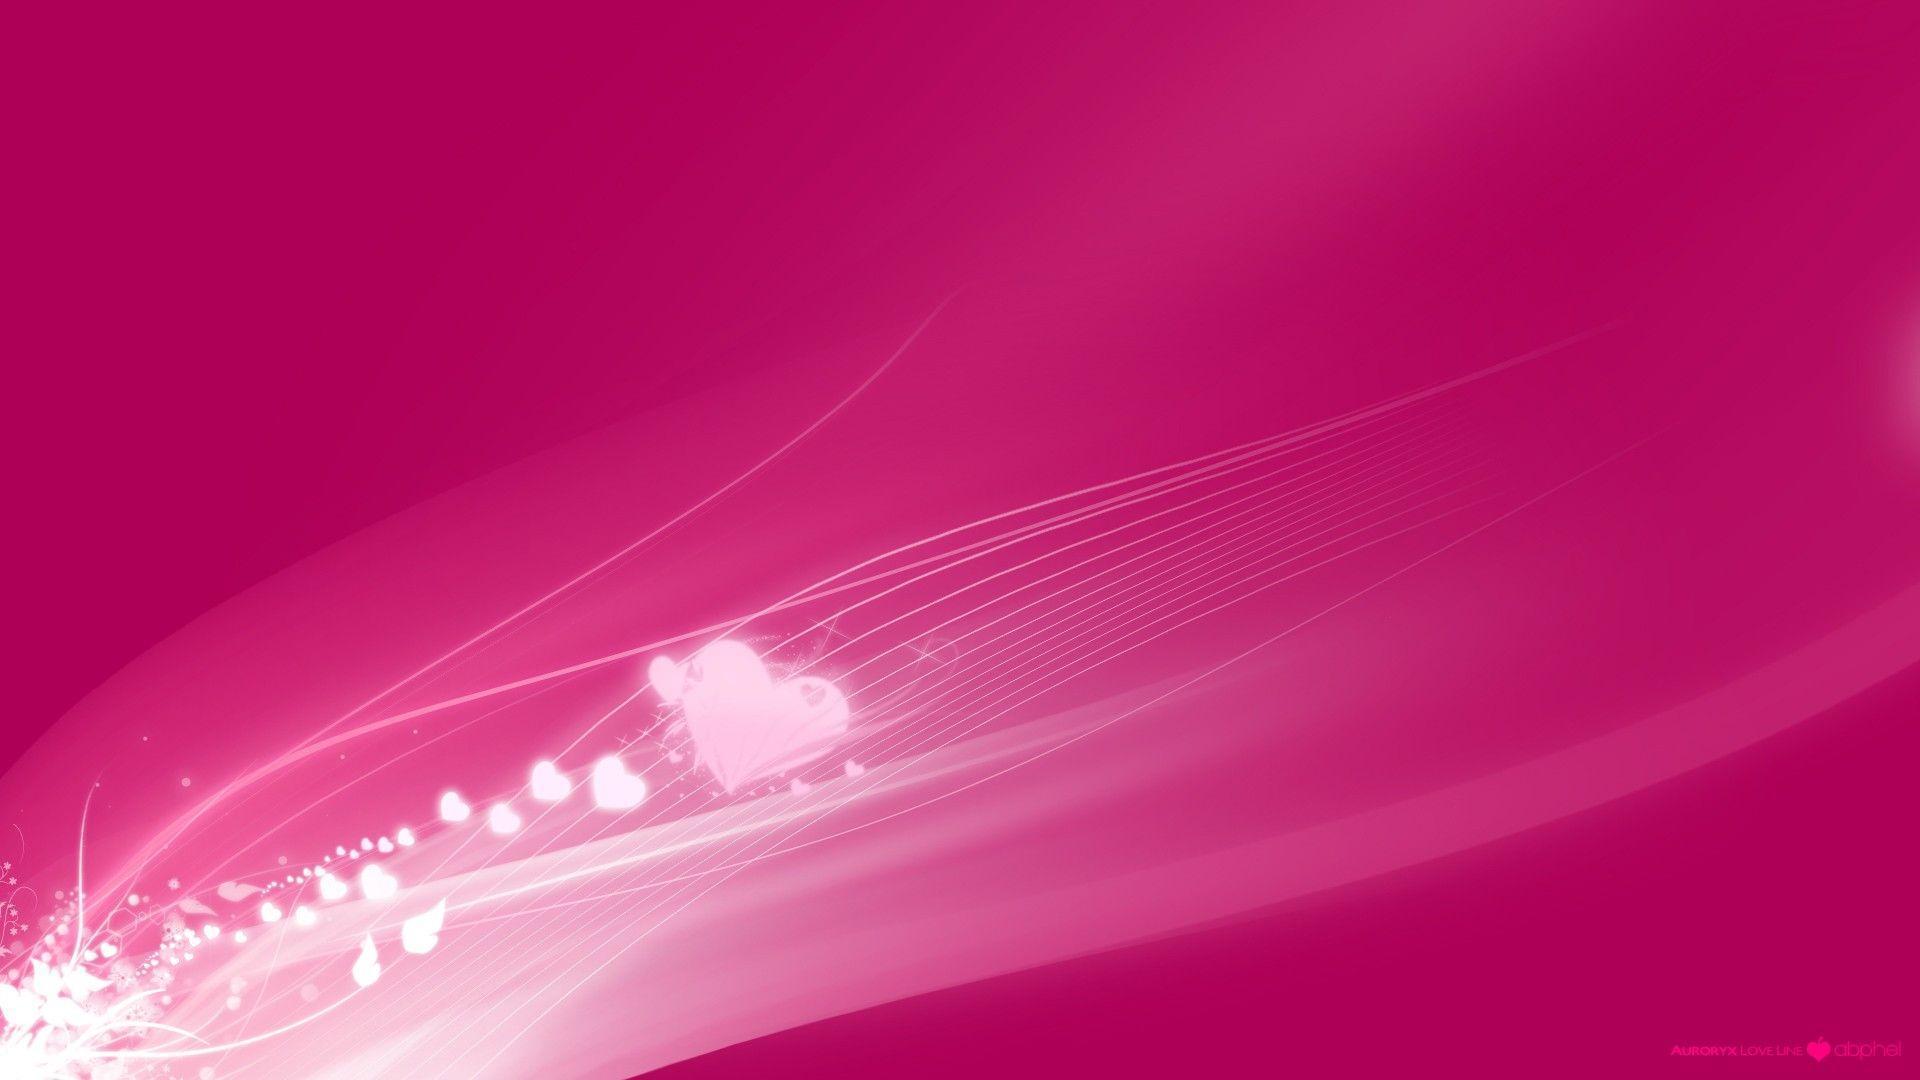 Wallpaper For > Love Pink Background Tumblr